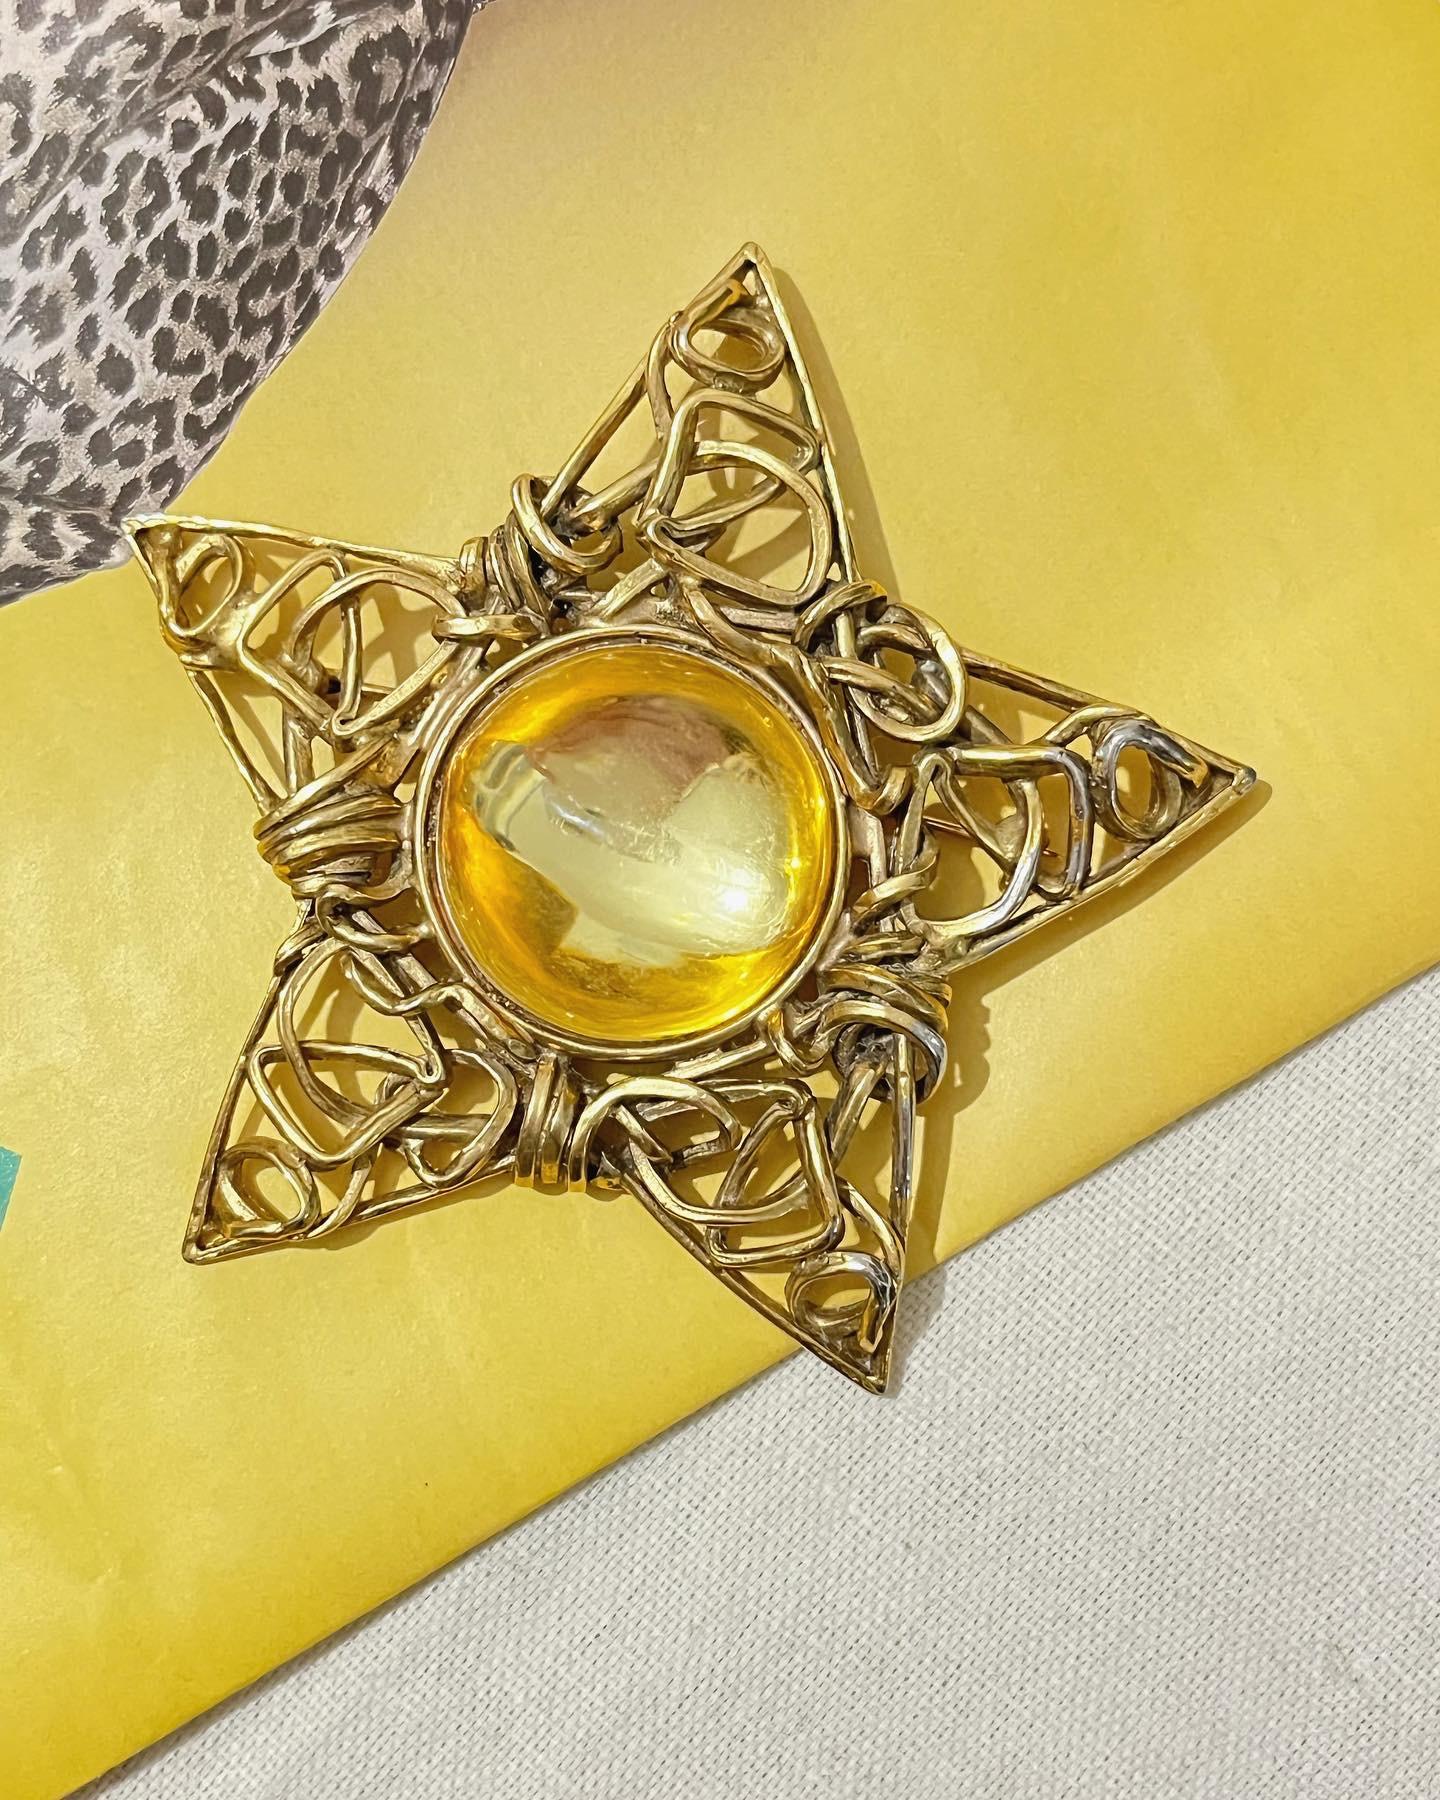 Very good condition, with some surface wear and colour loss due to time. Very rare.

Can be used as pendant or brooch. 

Signed on the back Yves Saint Laurent, Made in France.

Size: approx. 9.5 cm.

Weight: Approx. 48 g.

_ _ _

Great for everyday